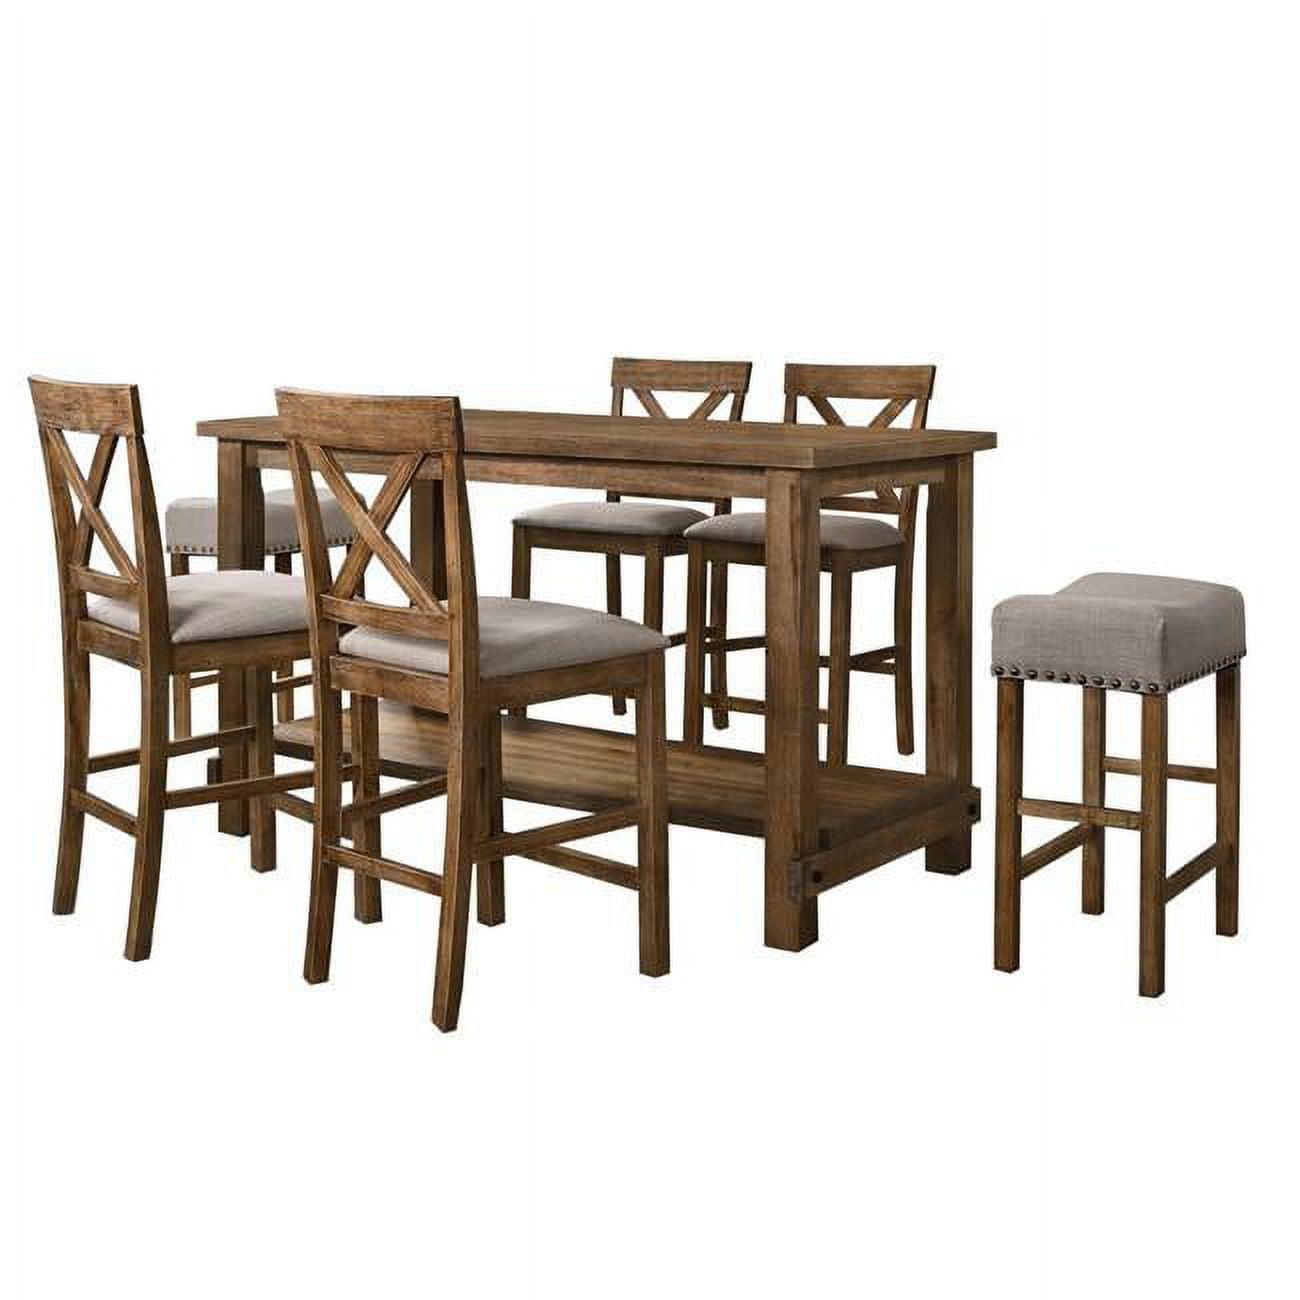 Janet 7-Piece Driftwood Pub Dining Set with Linen-Blend Chairs